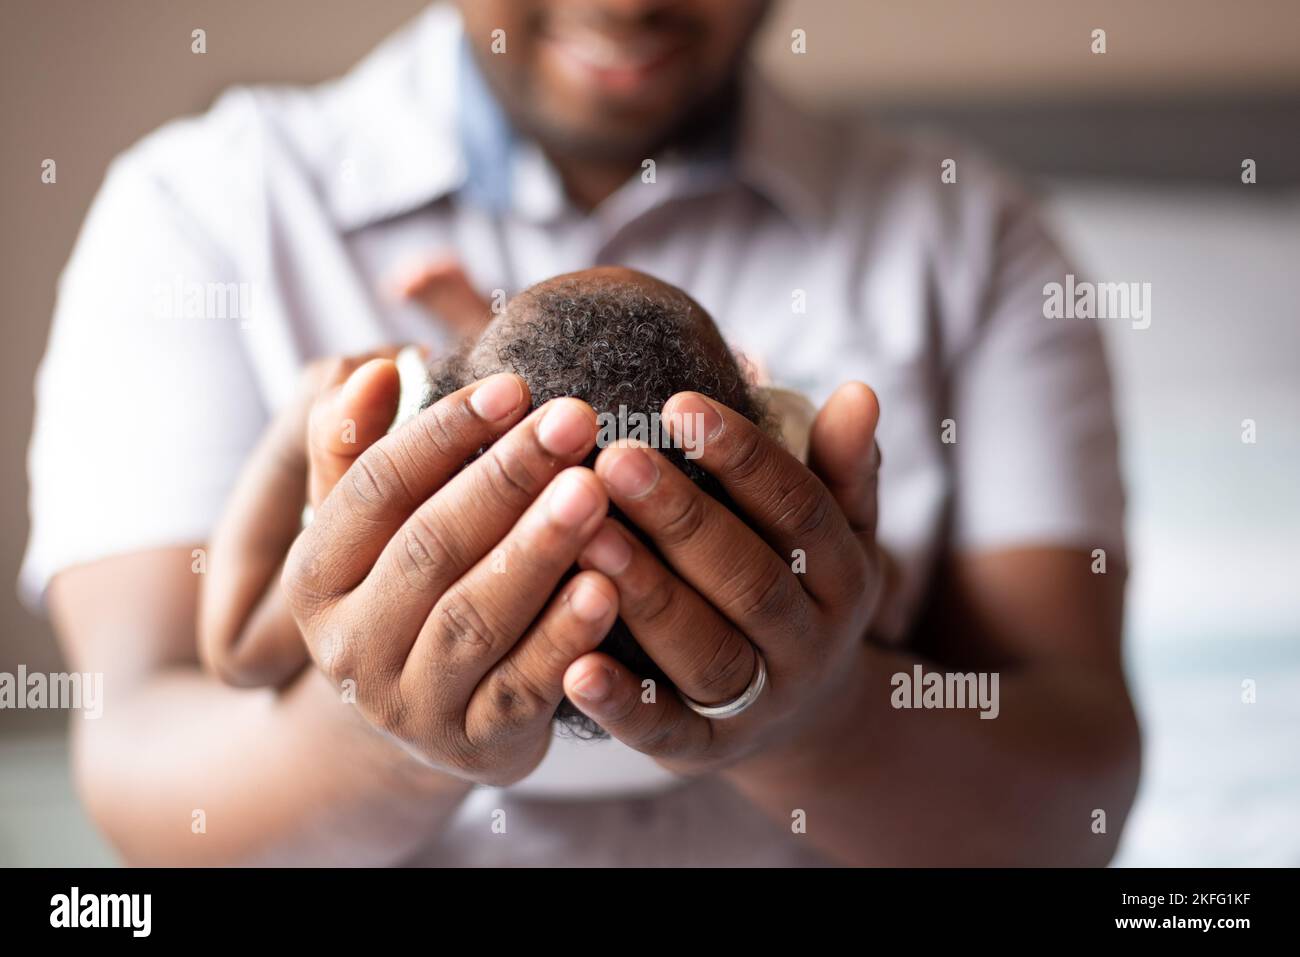 A dad holding his newborn baby in his hands, with a close up of the baby's head and hair Stock Photo